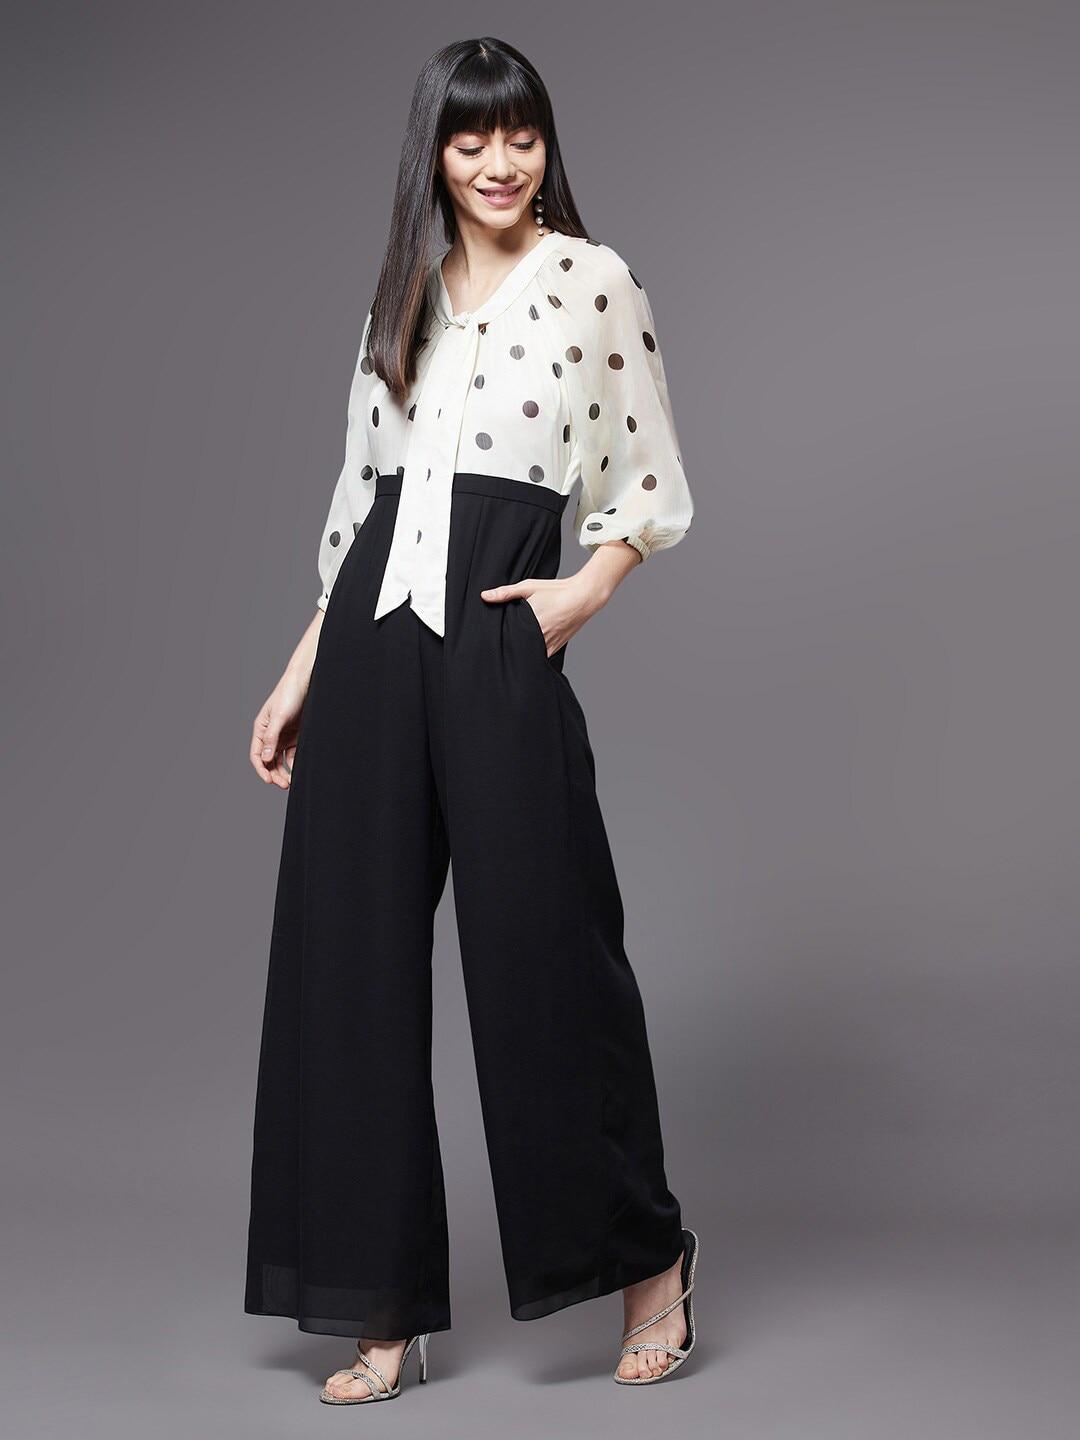 miss-chase-women-black-&-off-white-polka-dots-printed-jumpsuit